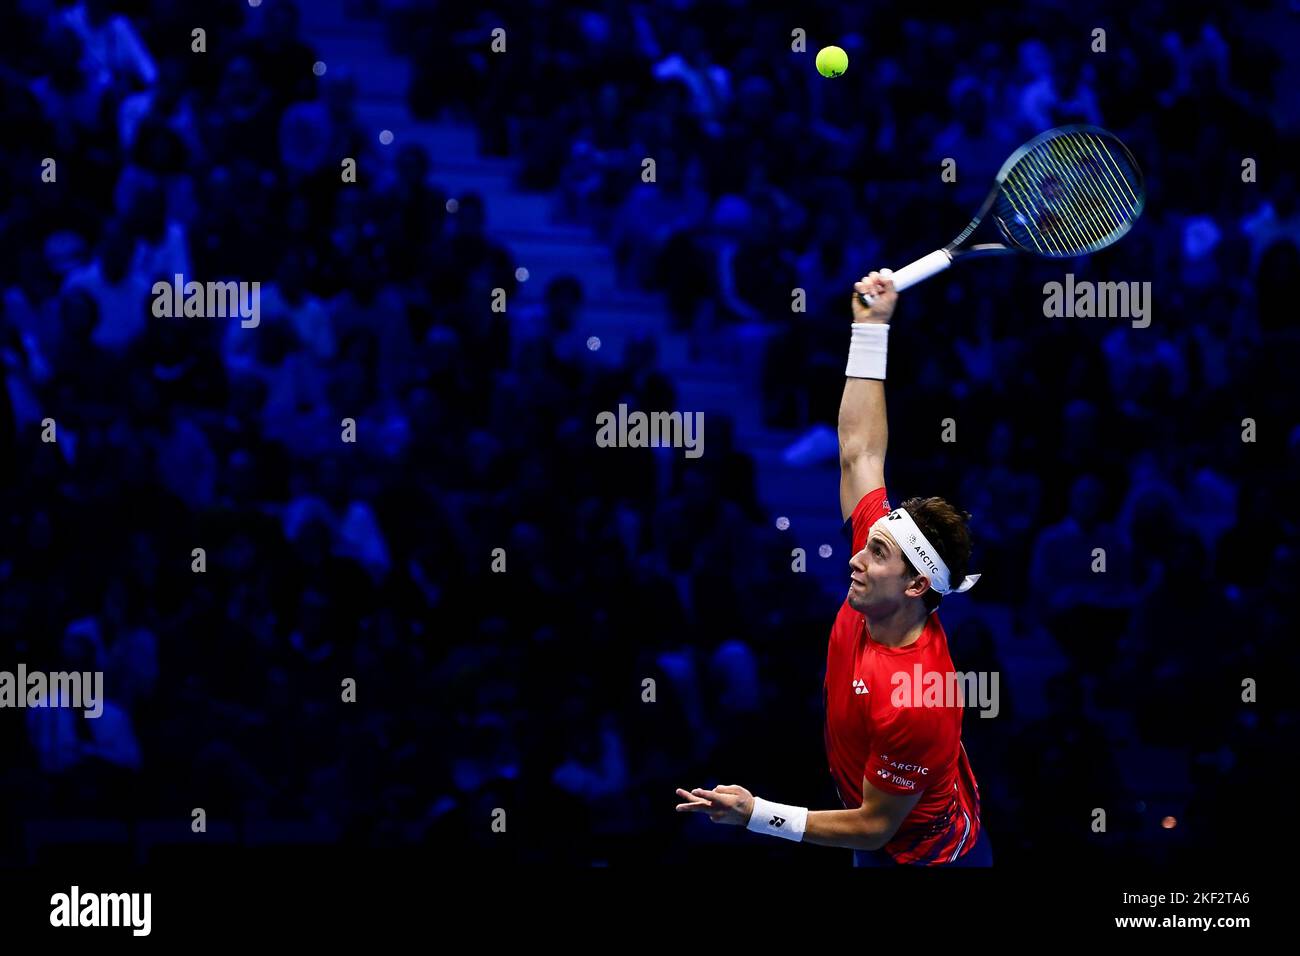 Turin, Italy. 15 November 2022. Casper Ruud of Norway serves during his round robin match against Taylor Fritz of USA during day three of the Nitto ATP Finals. Credit: Nicolò Campo/Alamy Live News Stock Photo